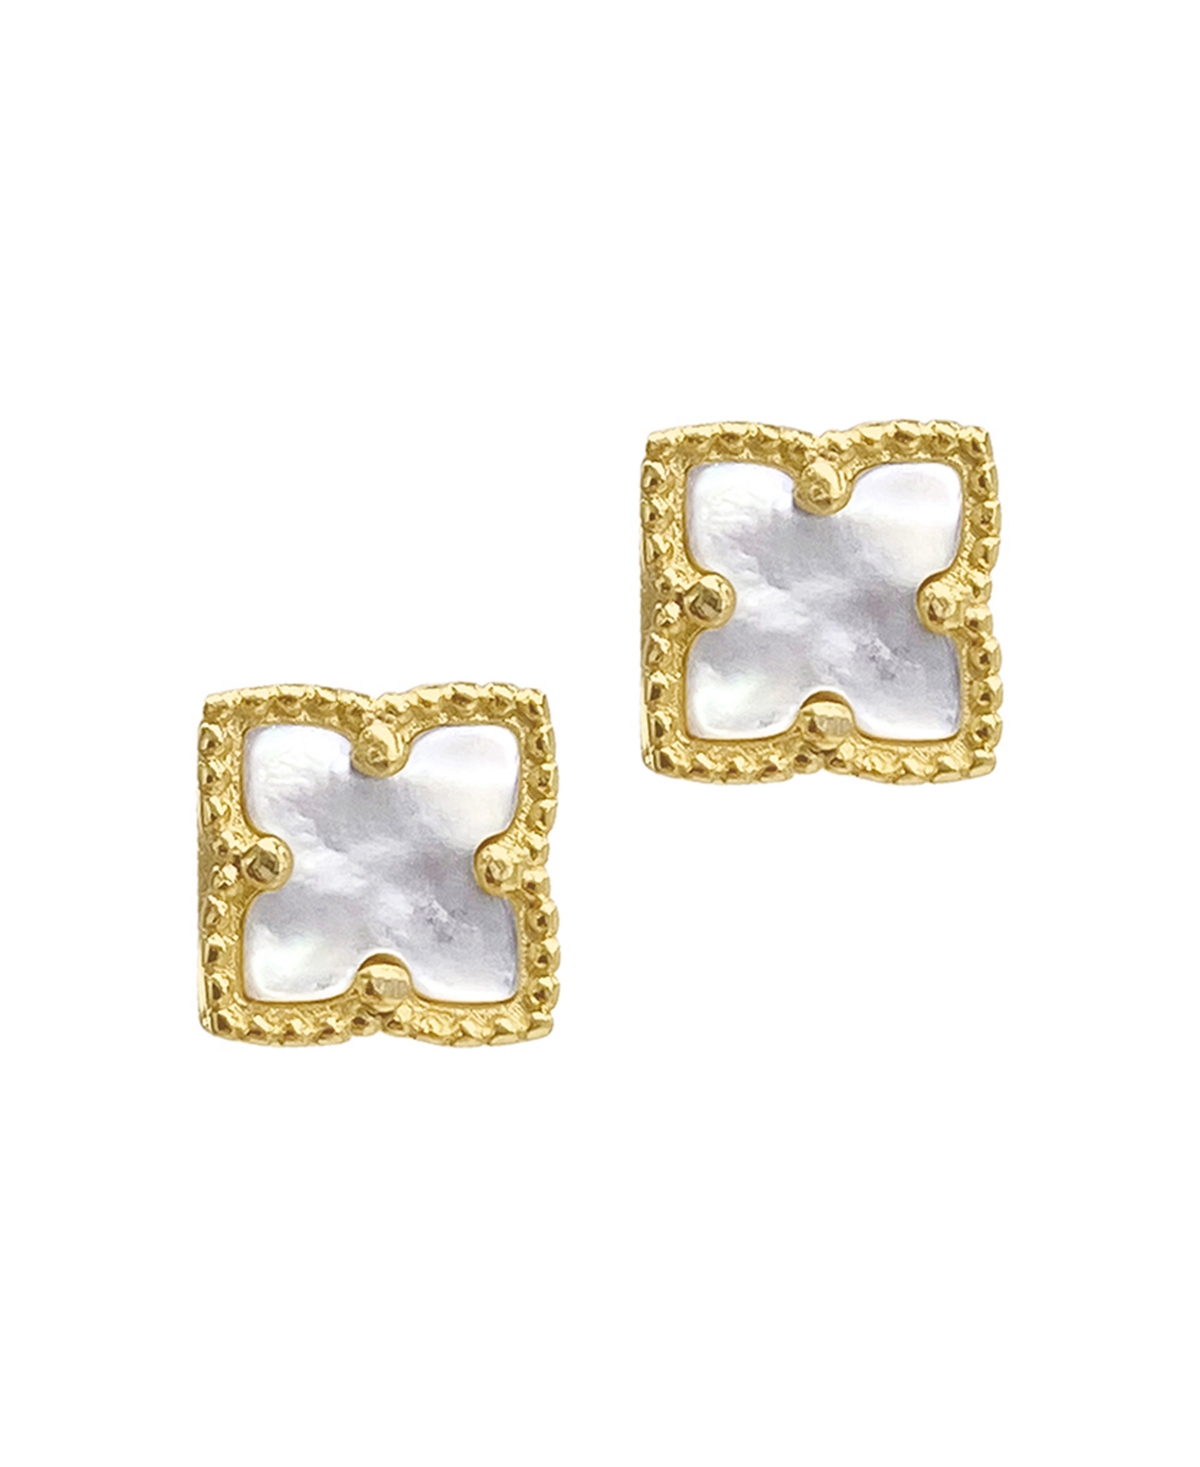 Mother of Imitation Pearl Gold-Tone Flower Stud Earrings - White